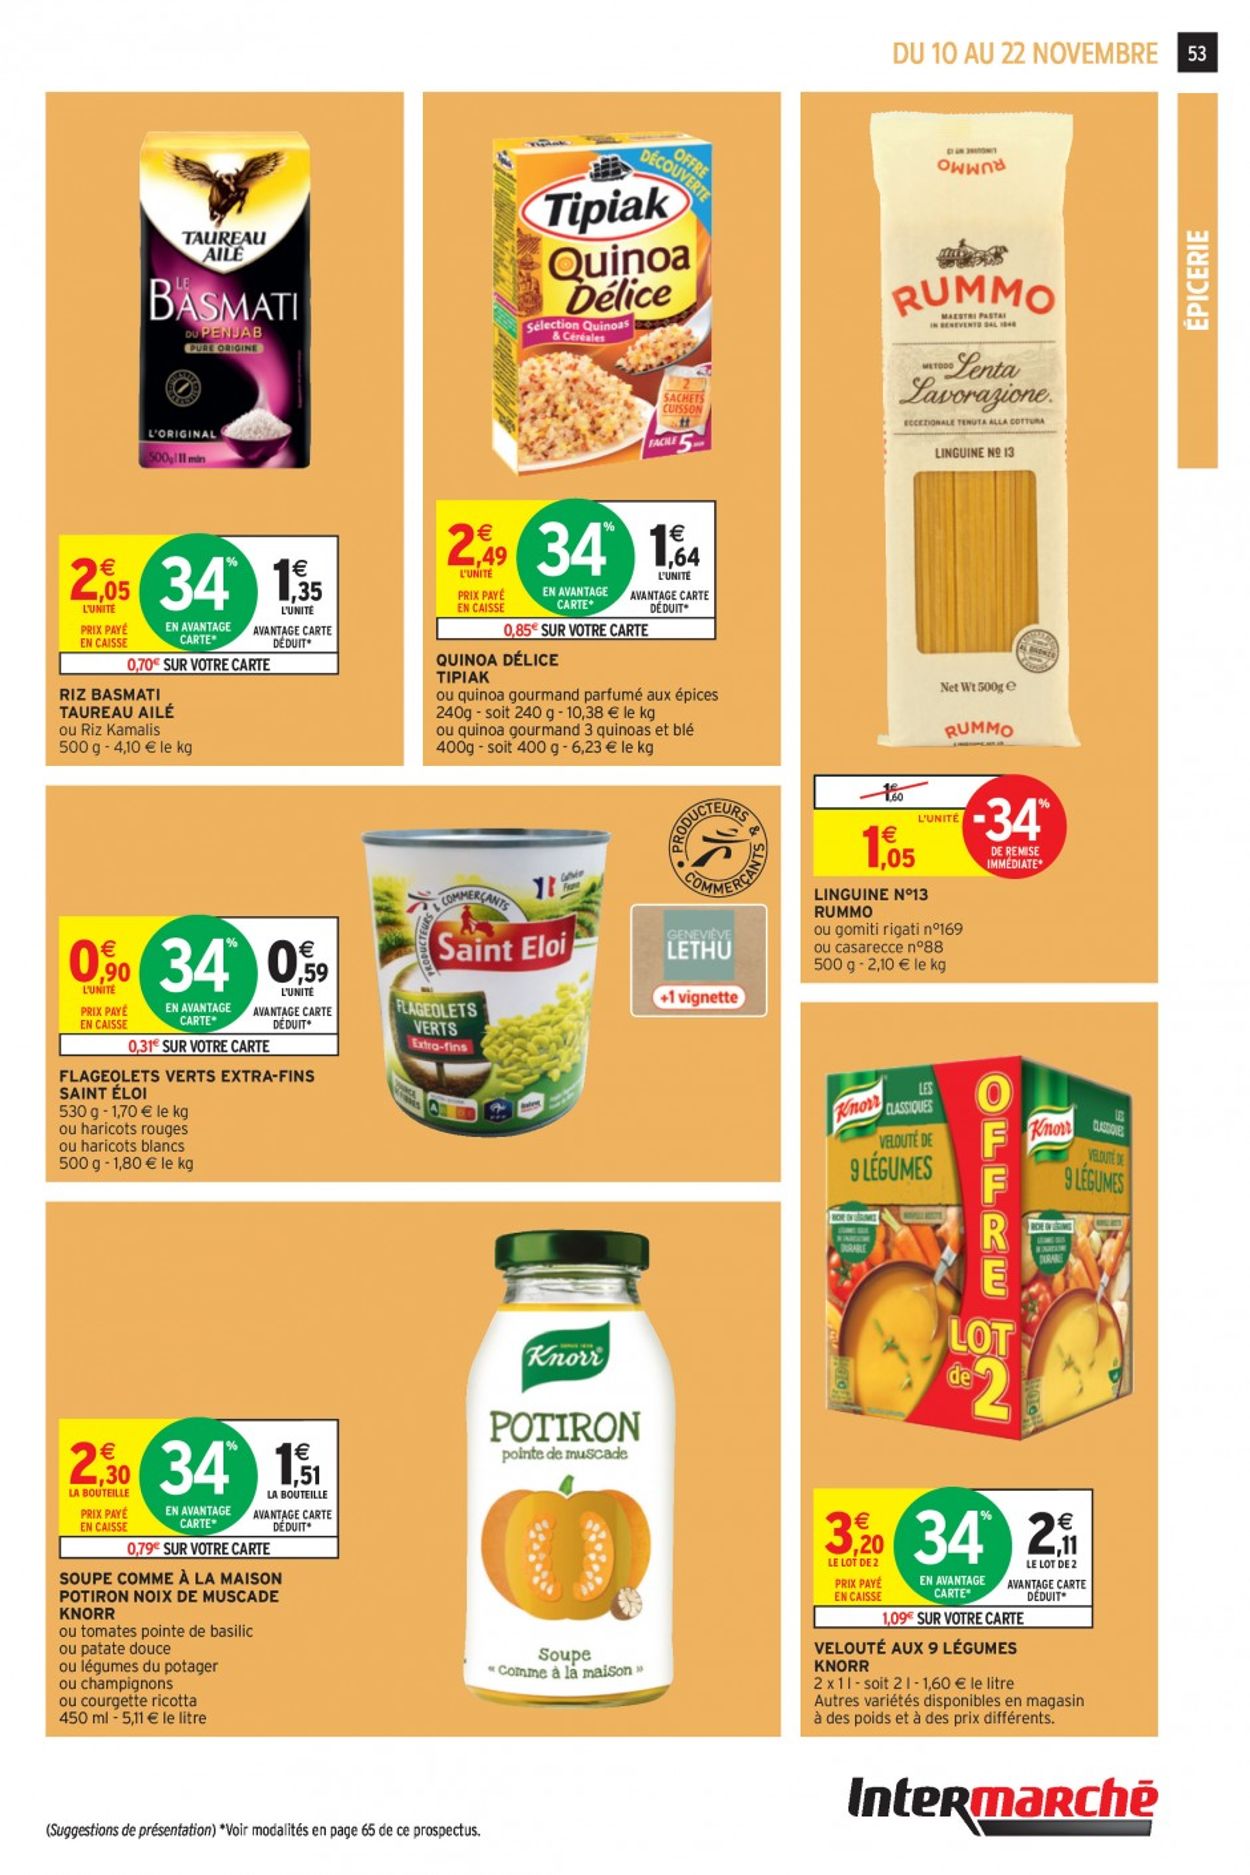 Intermarché Black Friday 2020 Catalogue - 10.11-22.11.2020 (Page 53)